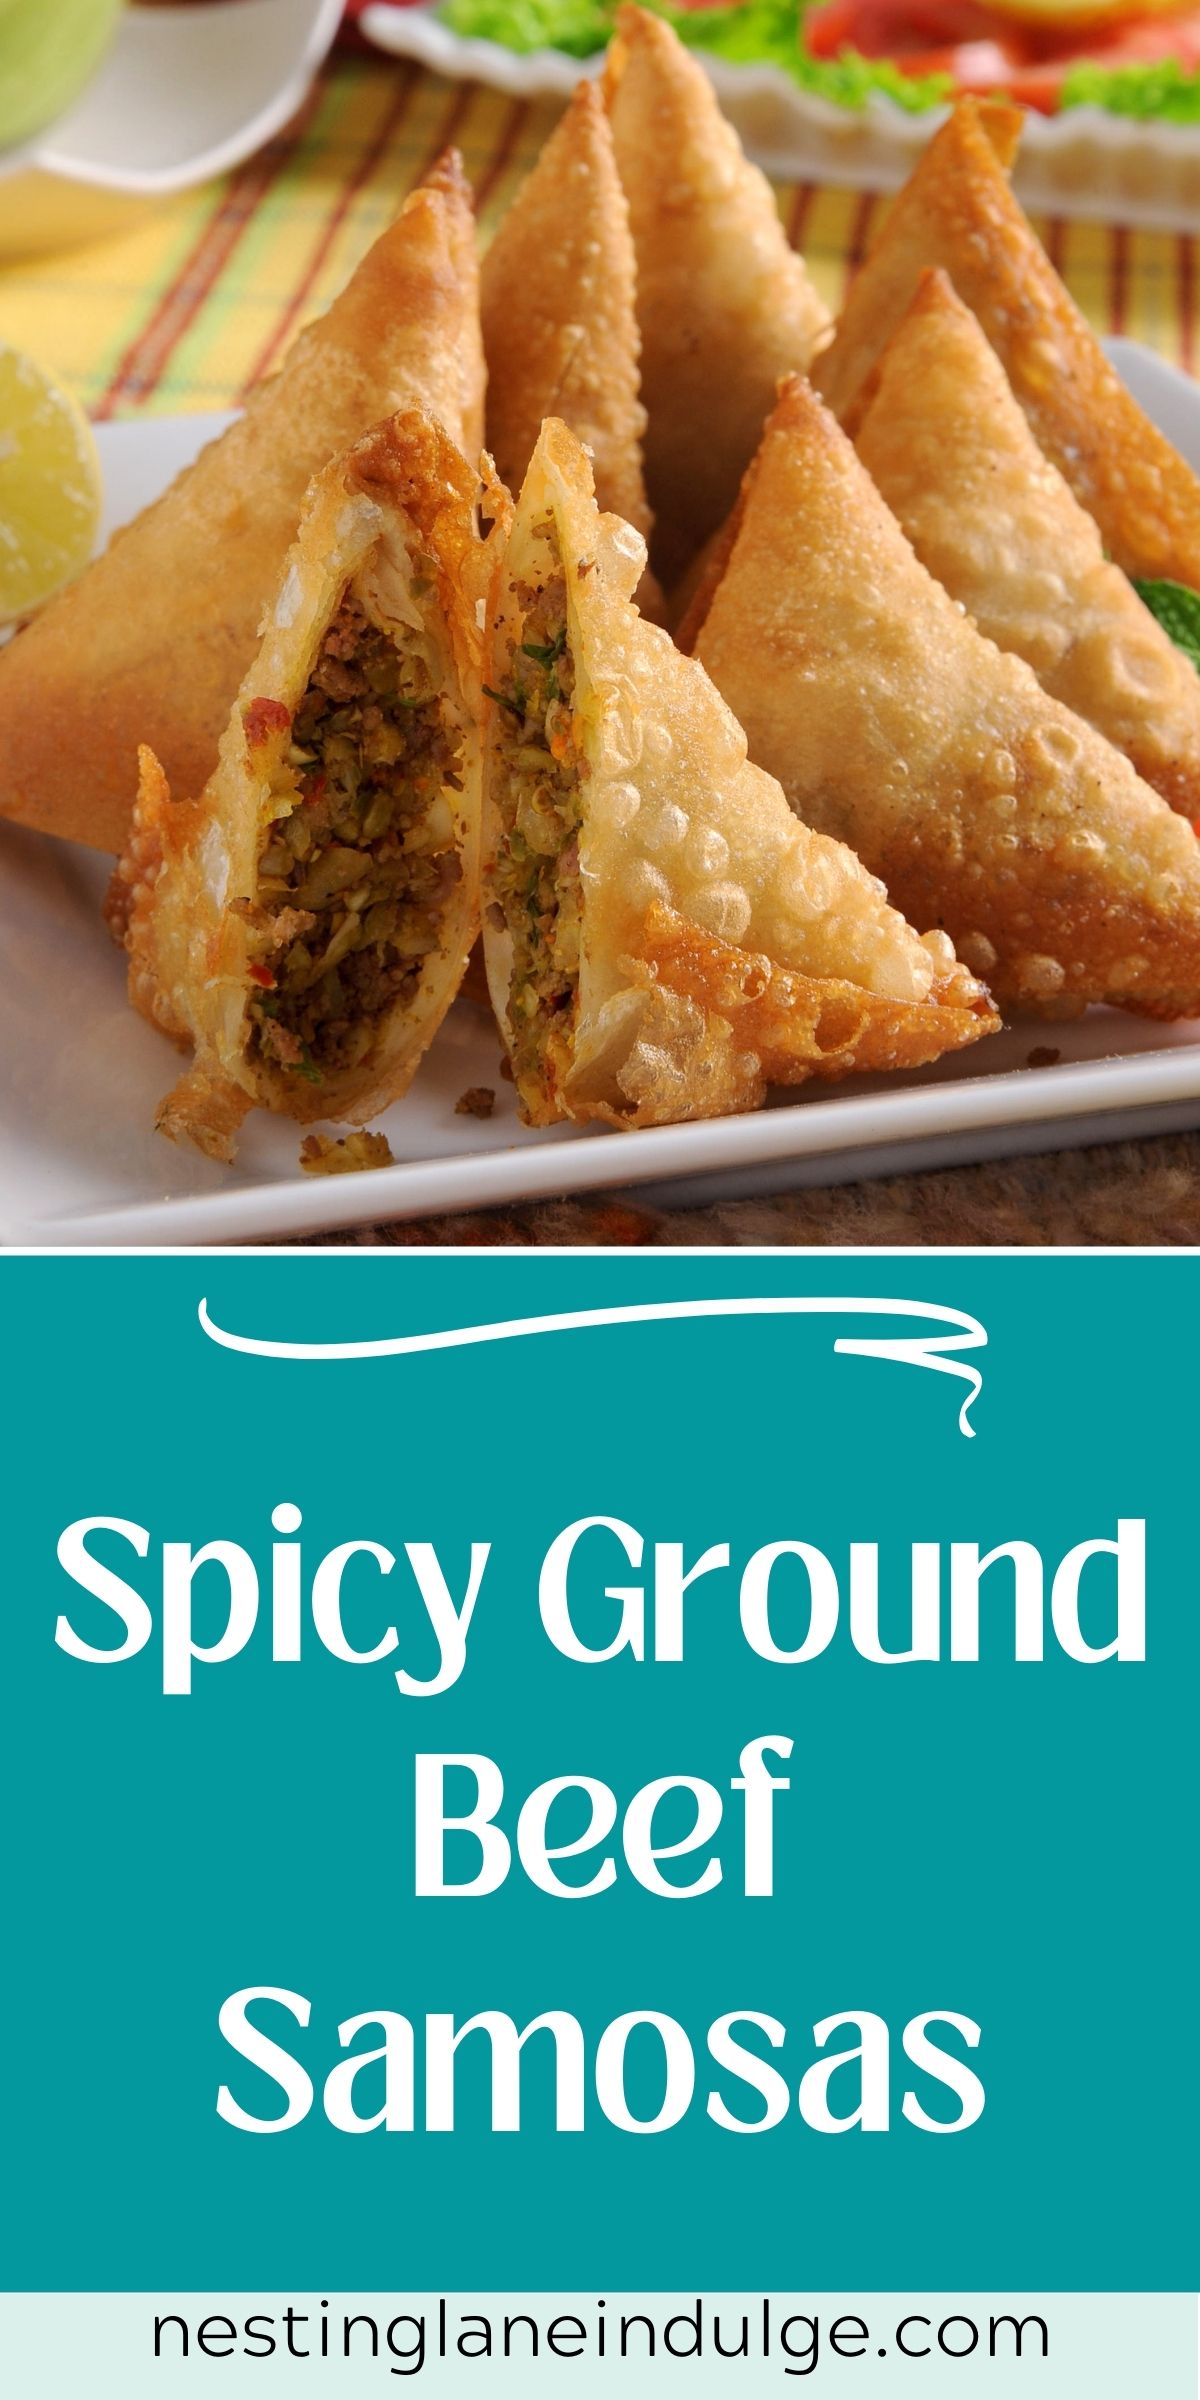 Graphic for Pinterest of Spicy Ground Beef Samosas Recipe.